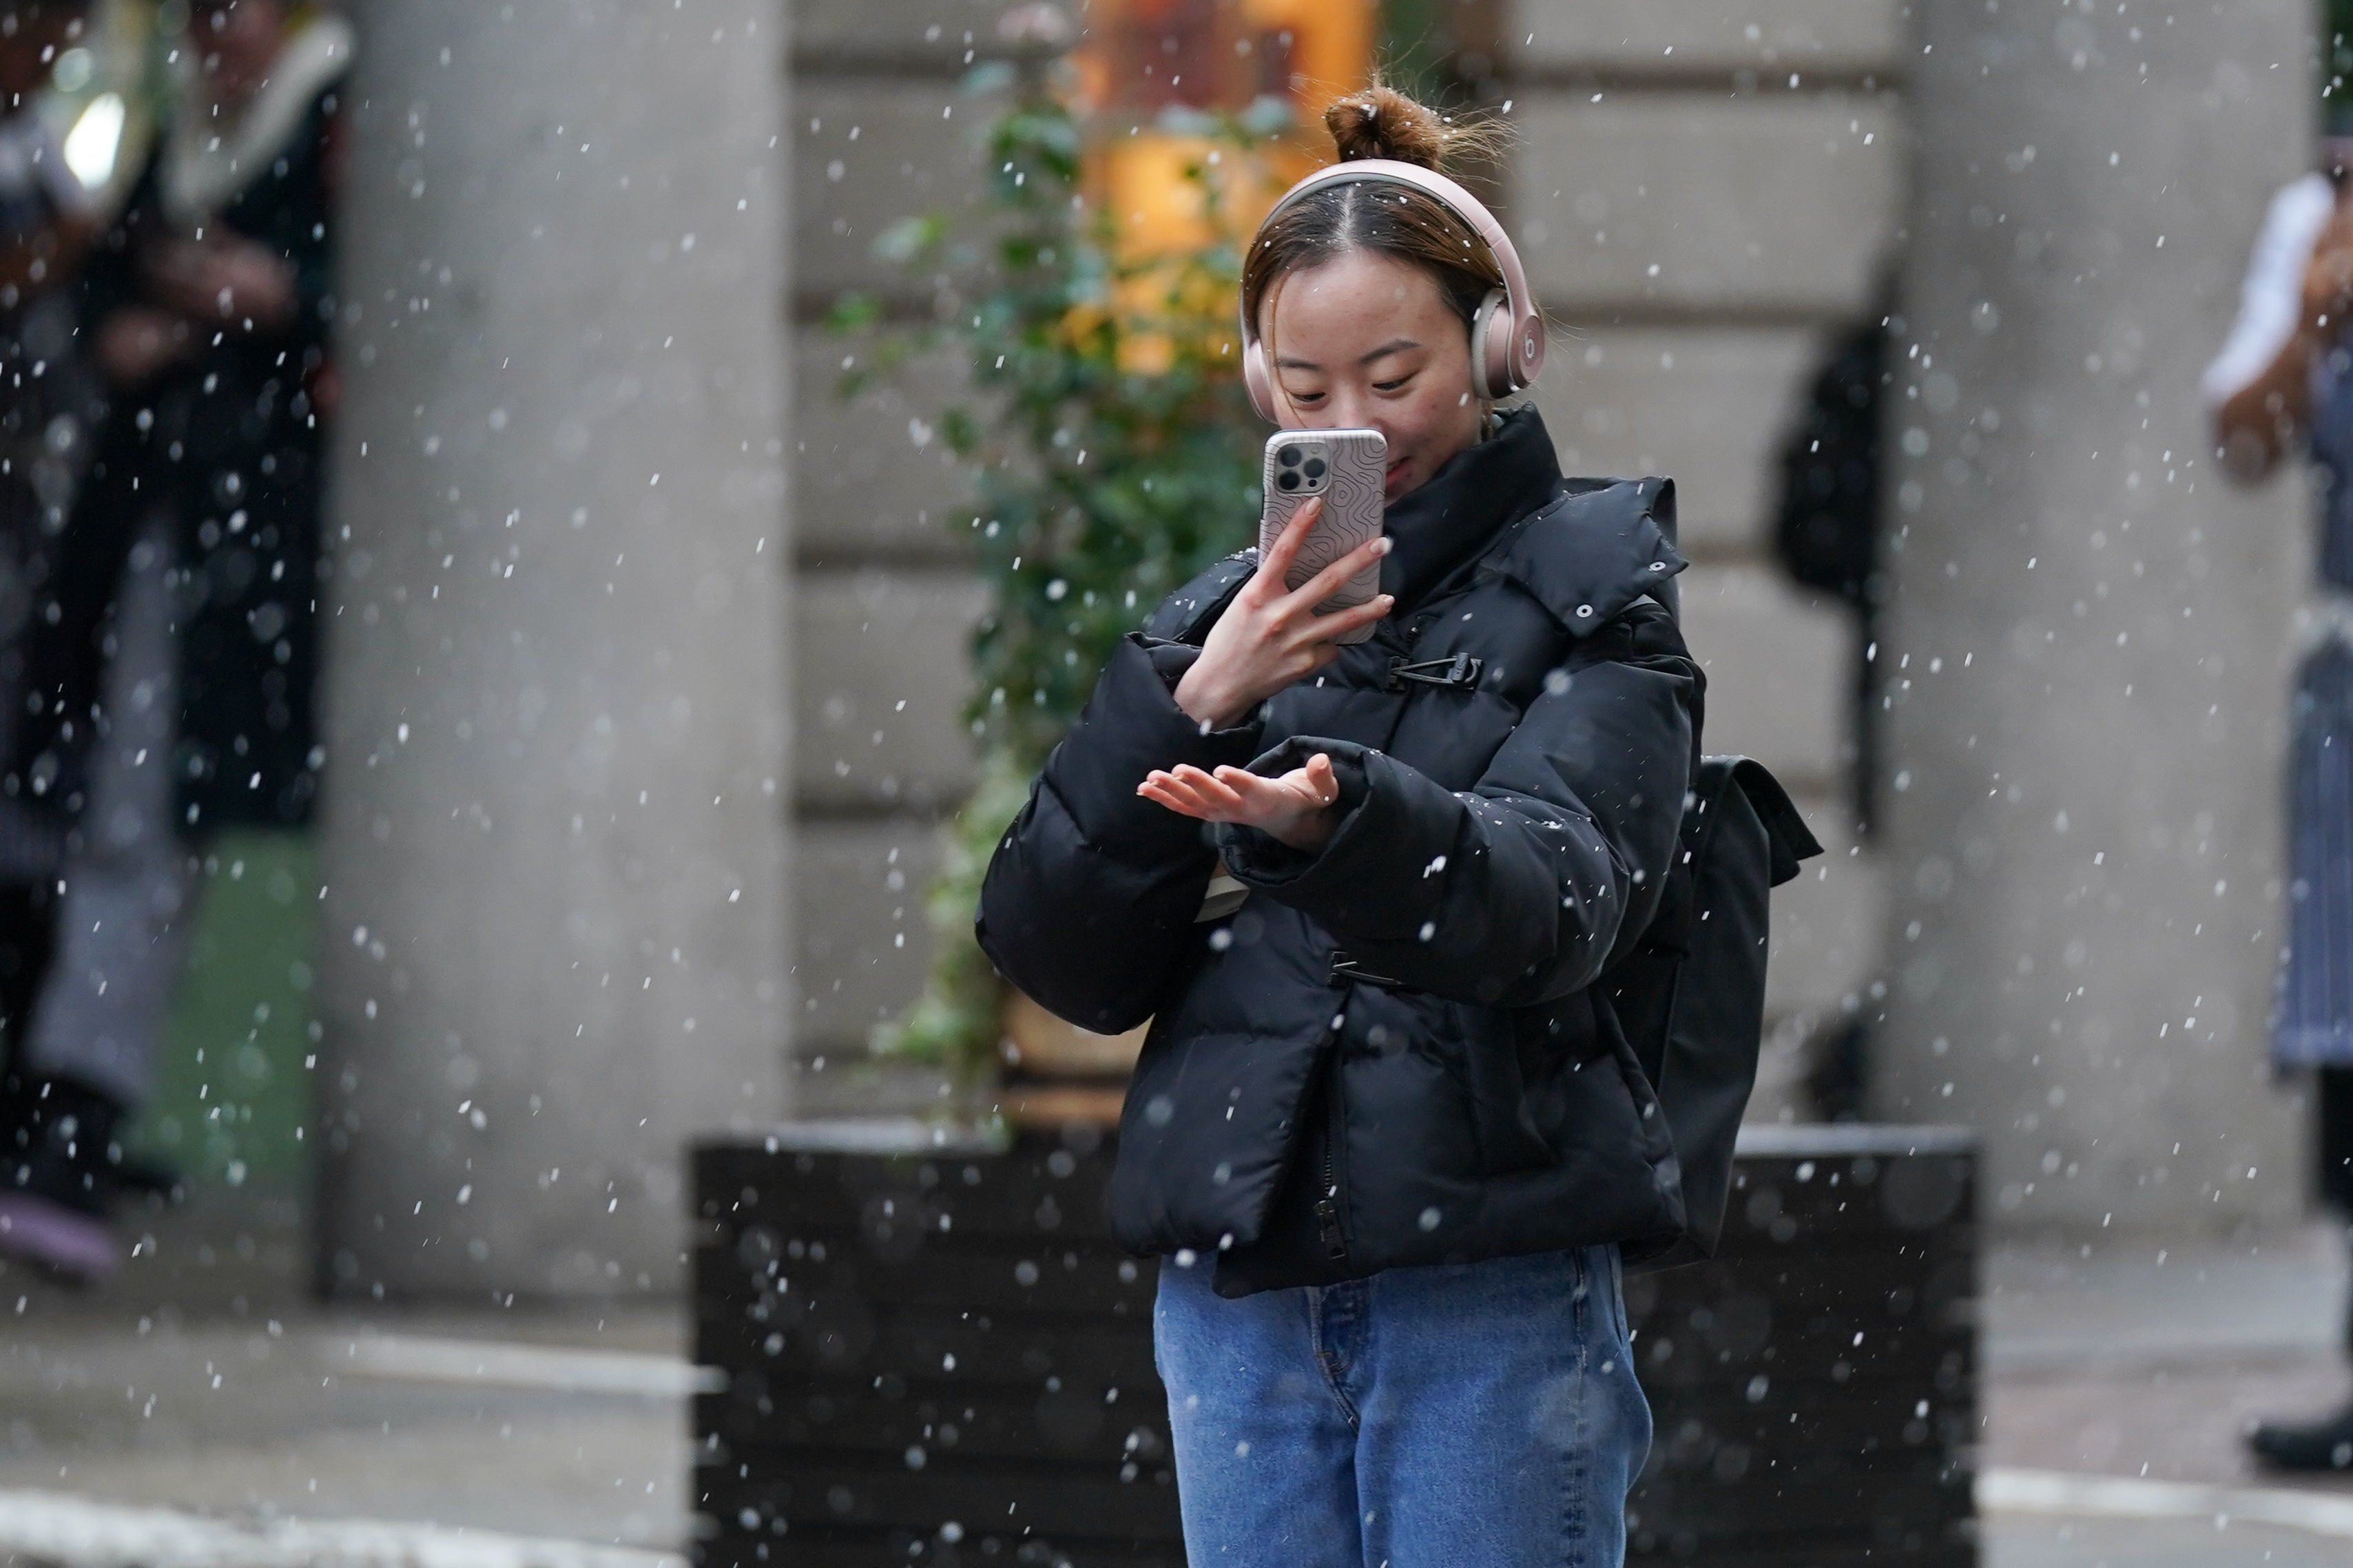 A person on her mobile phone capturing images of the snow in Covent Garden in London